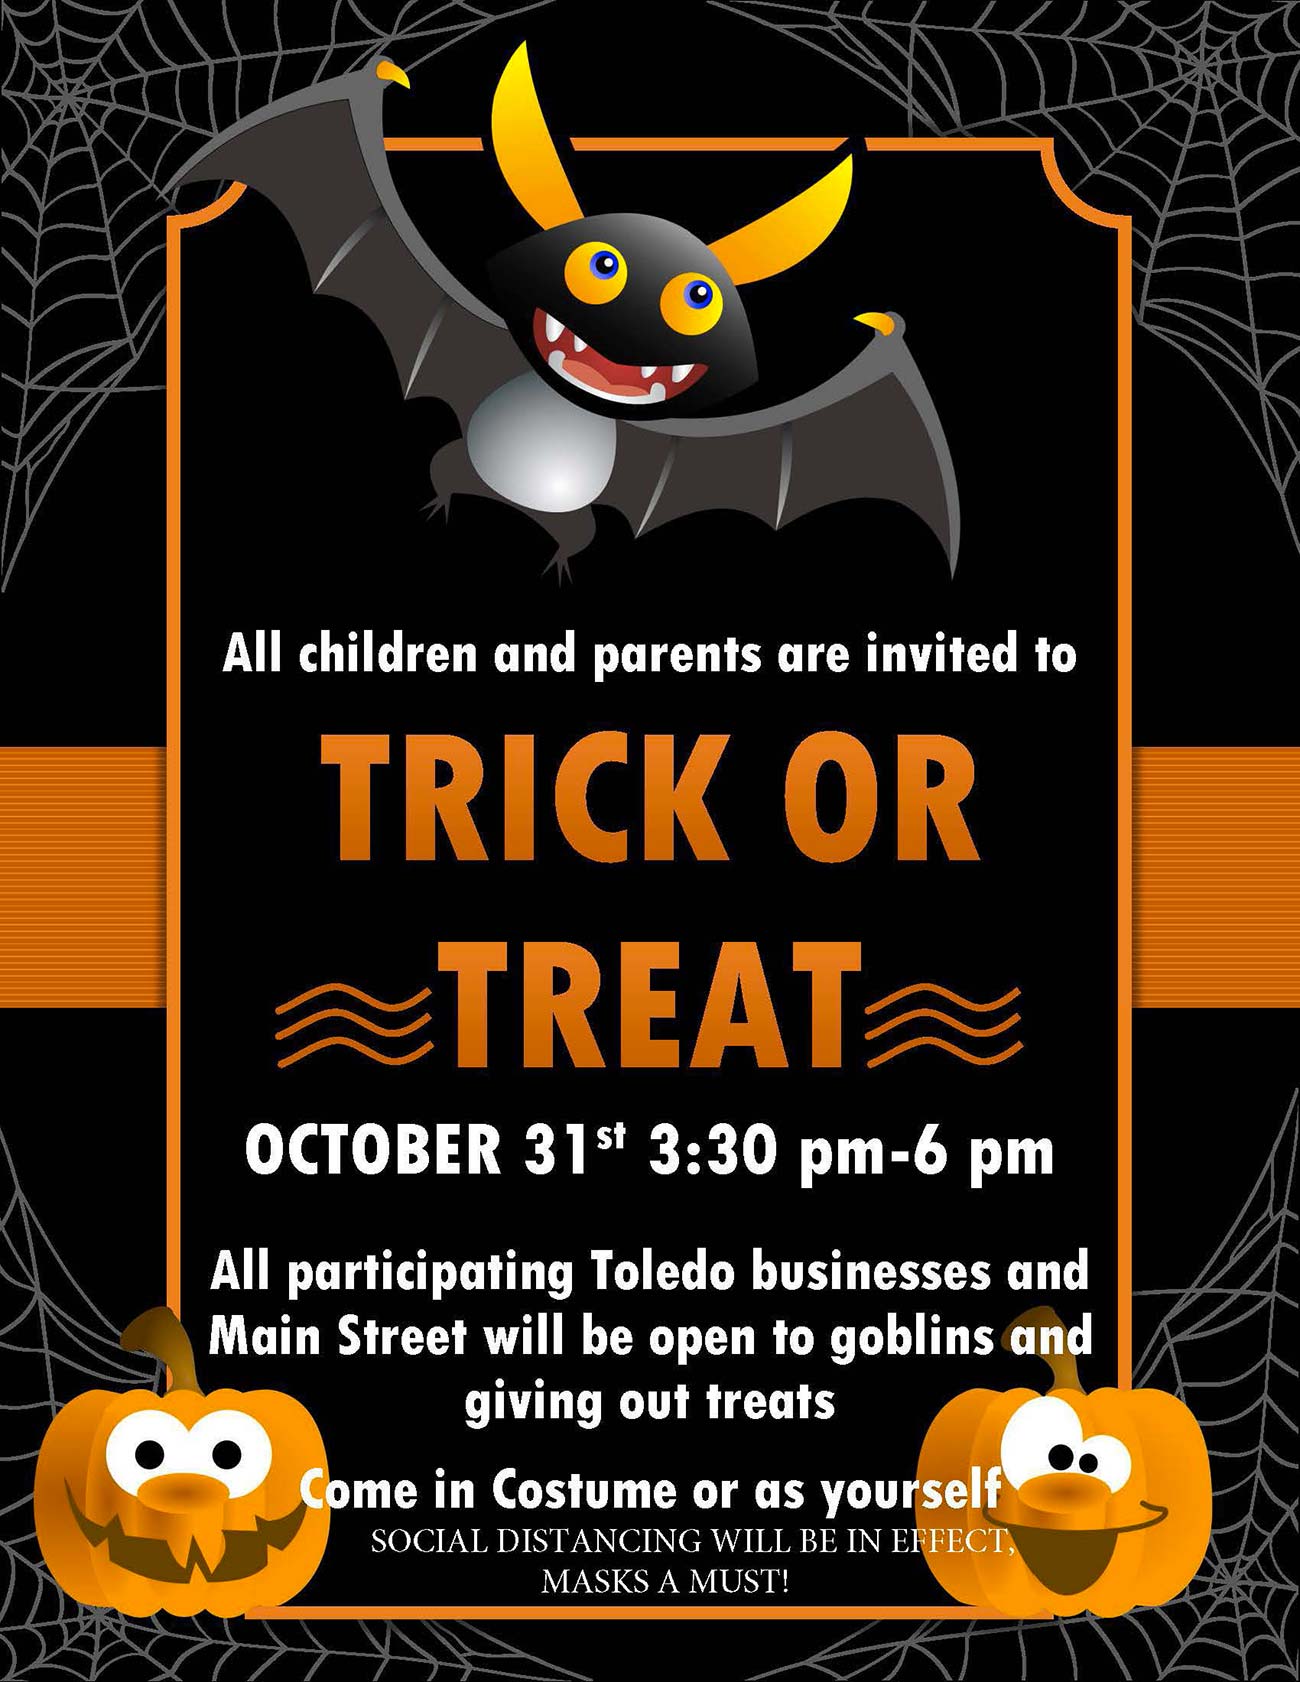 All children and parents invited to Trick or Treat October 31st